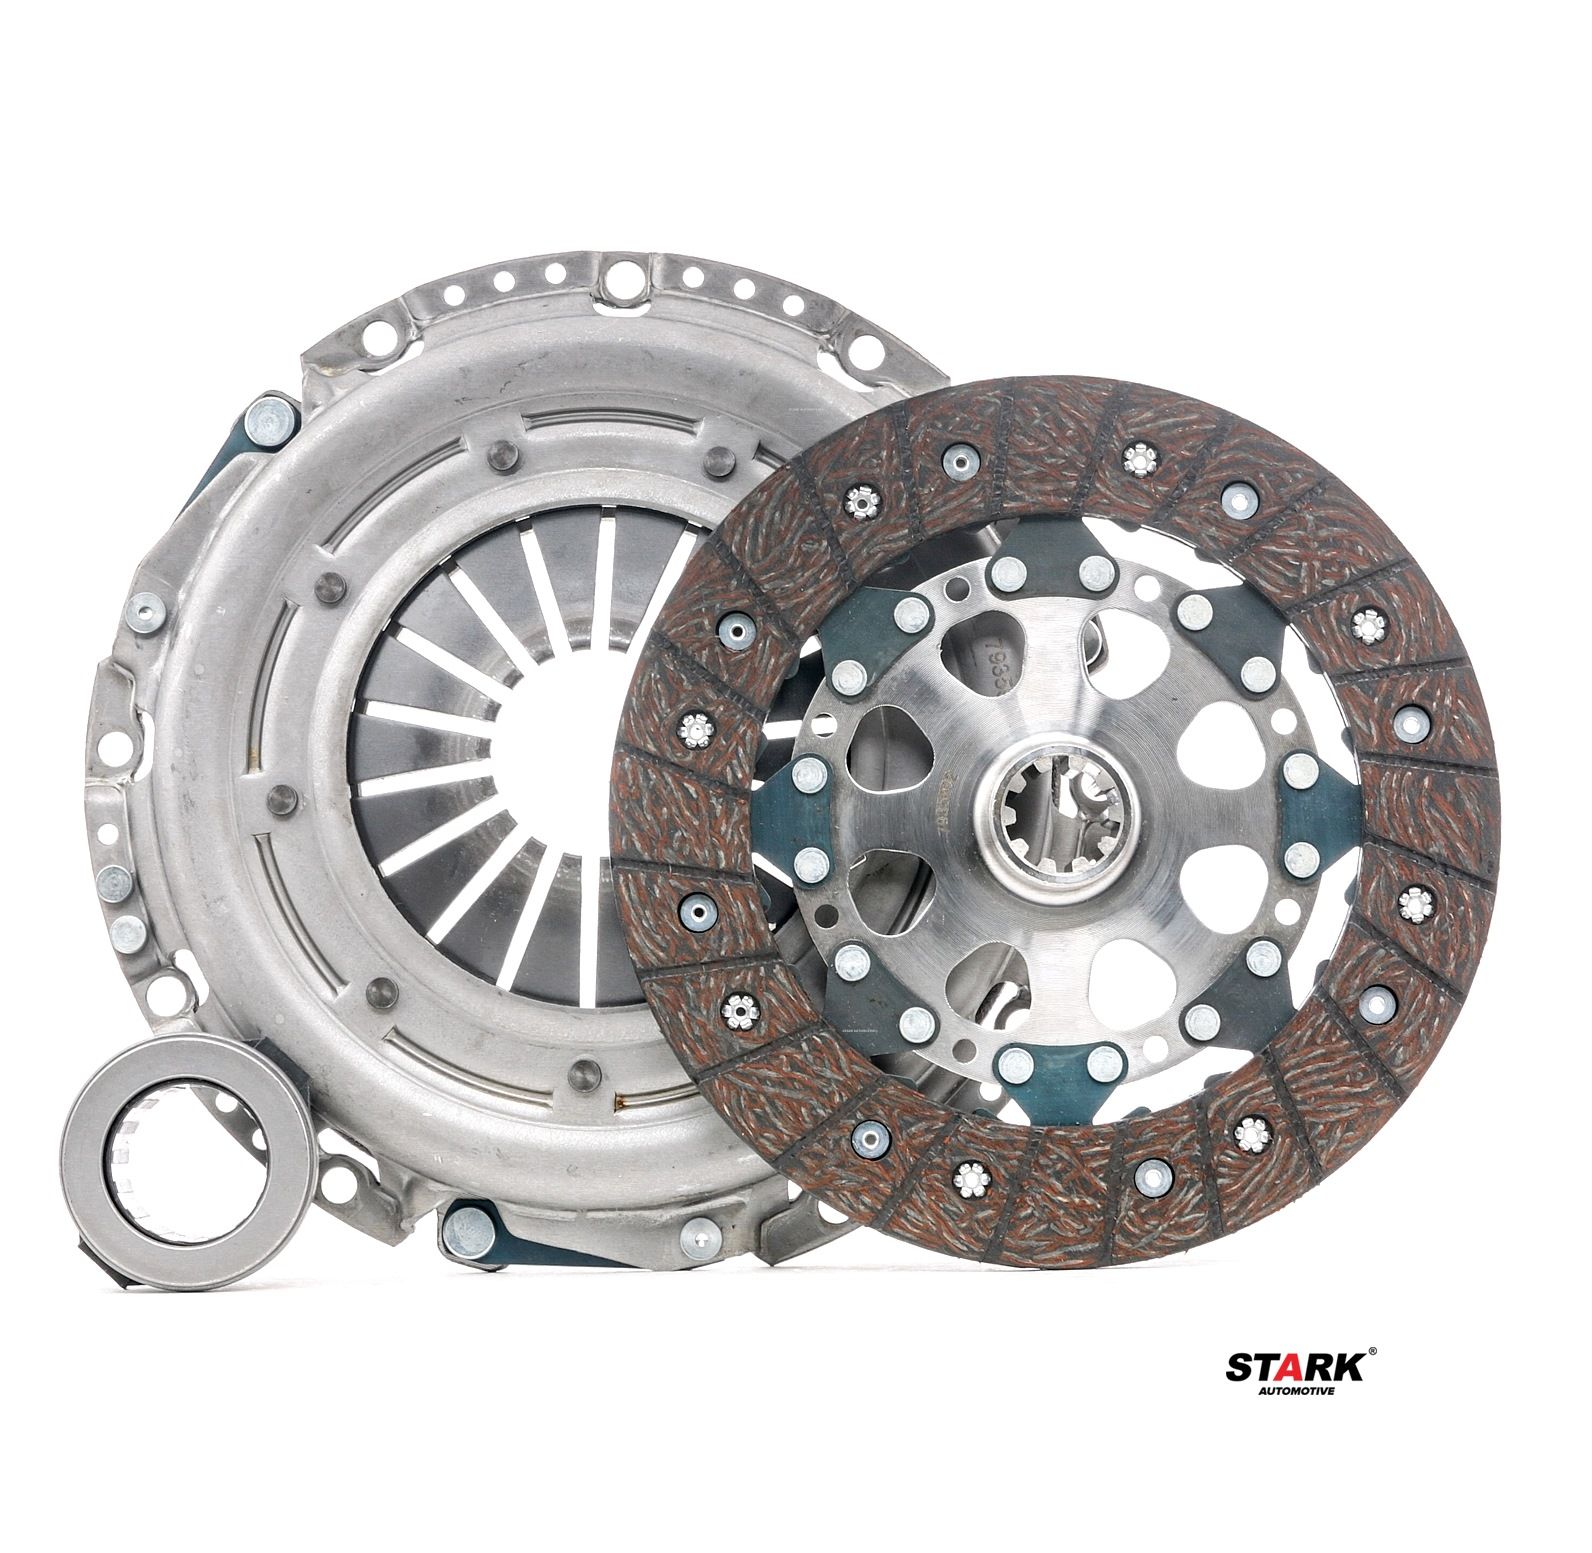 STARK SKCK-0100034 Clutch kit three-piece, with bearing(s), with clutch disc, 228mm